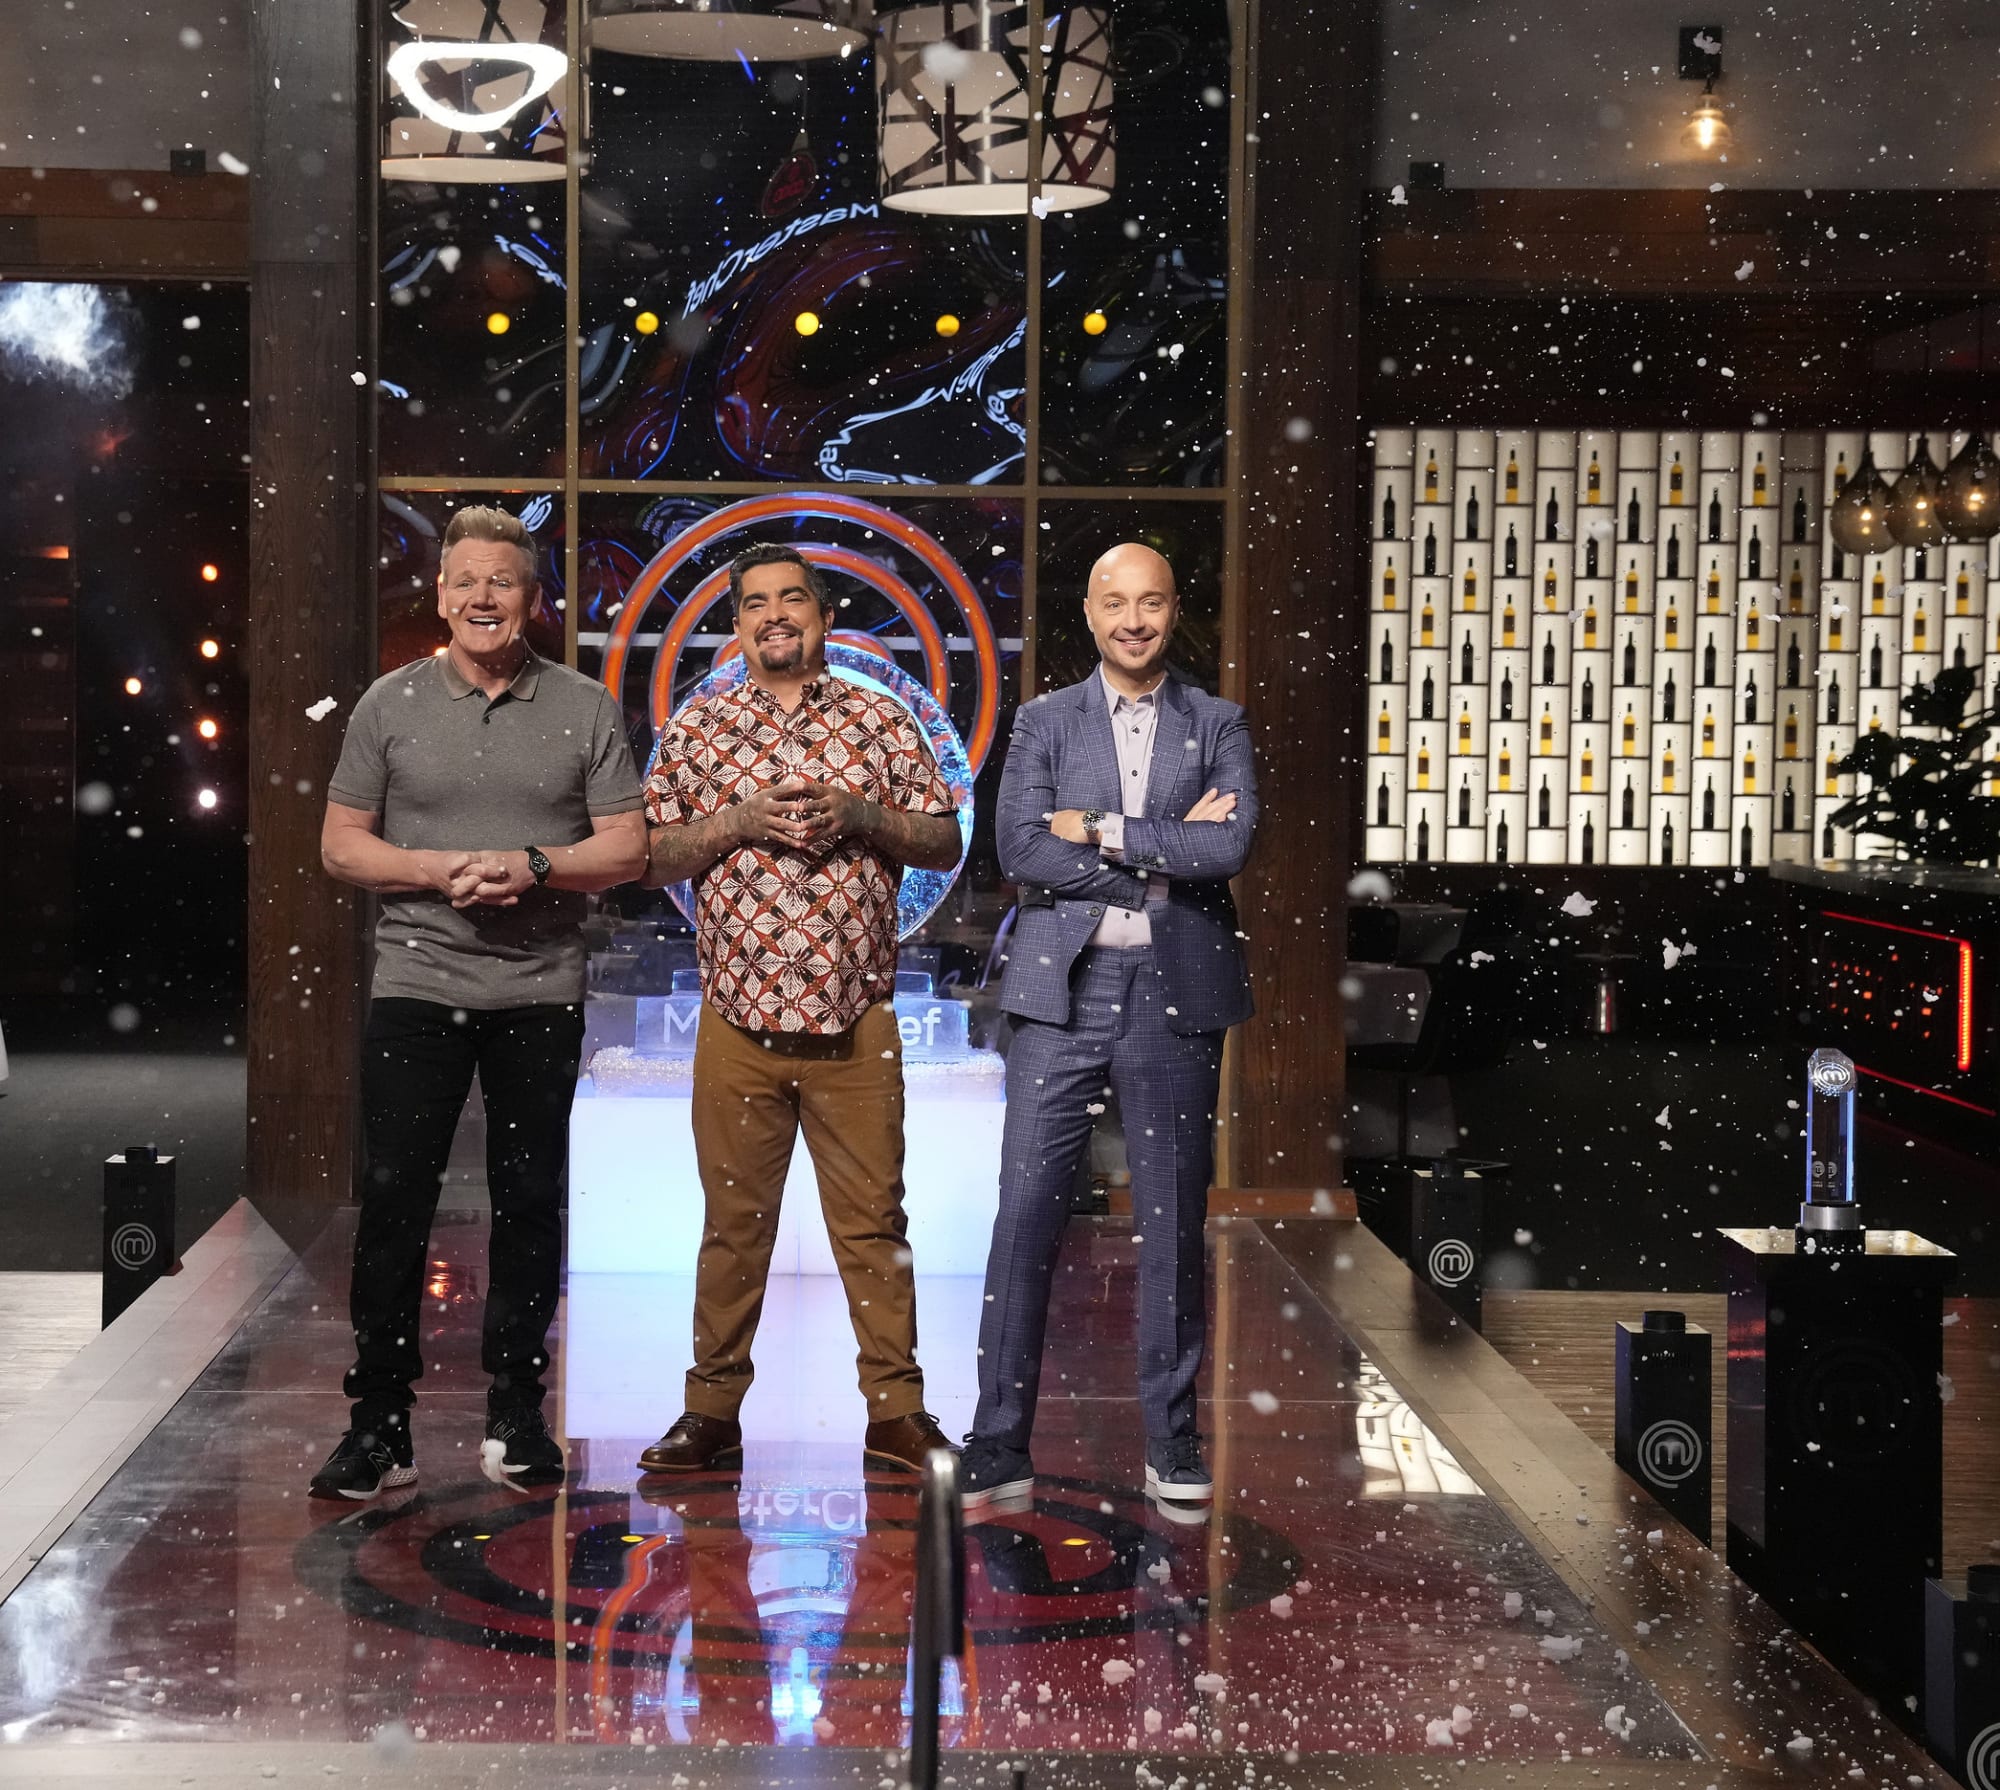 Preview, Season 10 Ep. 24, MASTERCHEF, 𝙏𝙝𝙞𝙨 𝙞𝙨 𝙞𝙩! ‍‍‍‍‍‍ ‍‍  Celebrate 200 episodes of MasterChef during the Season 10 finale Wednesday  at 8/7c., By MasterChef